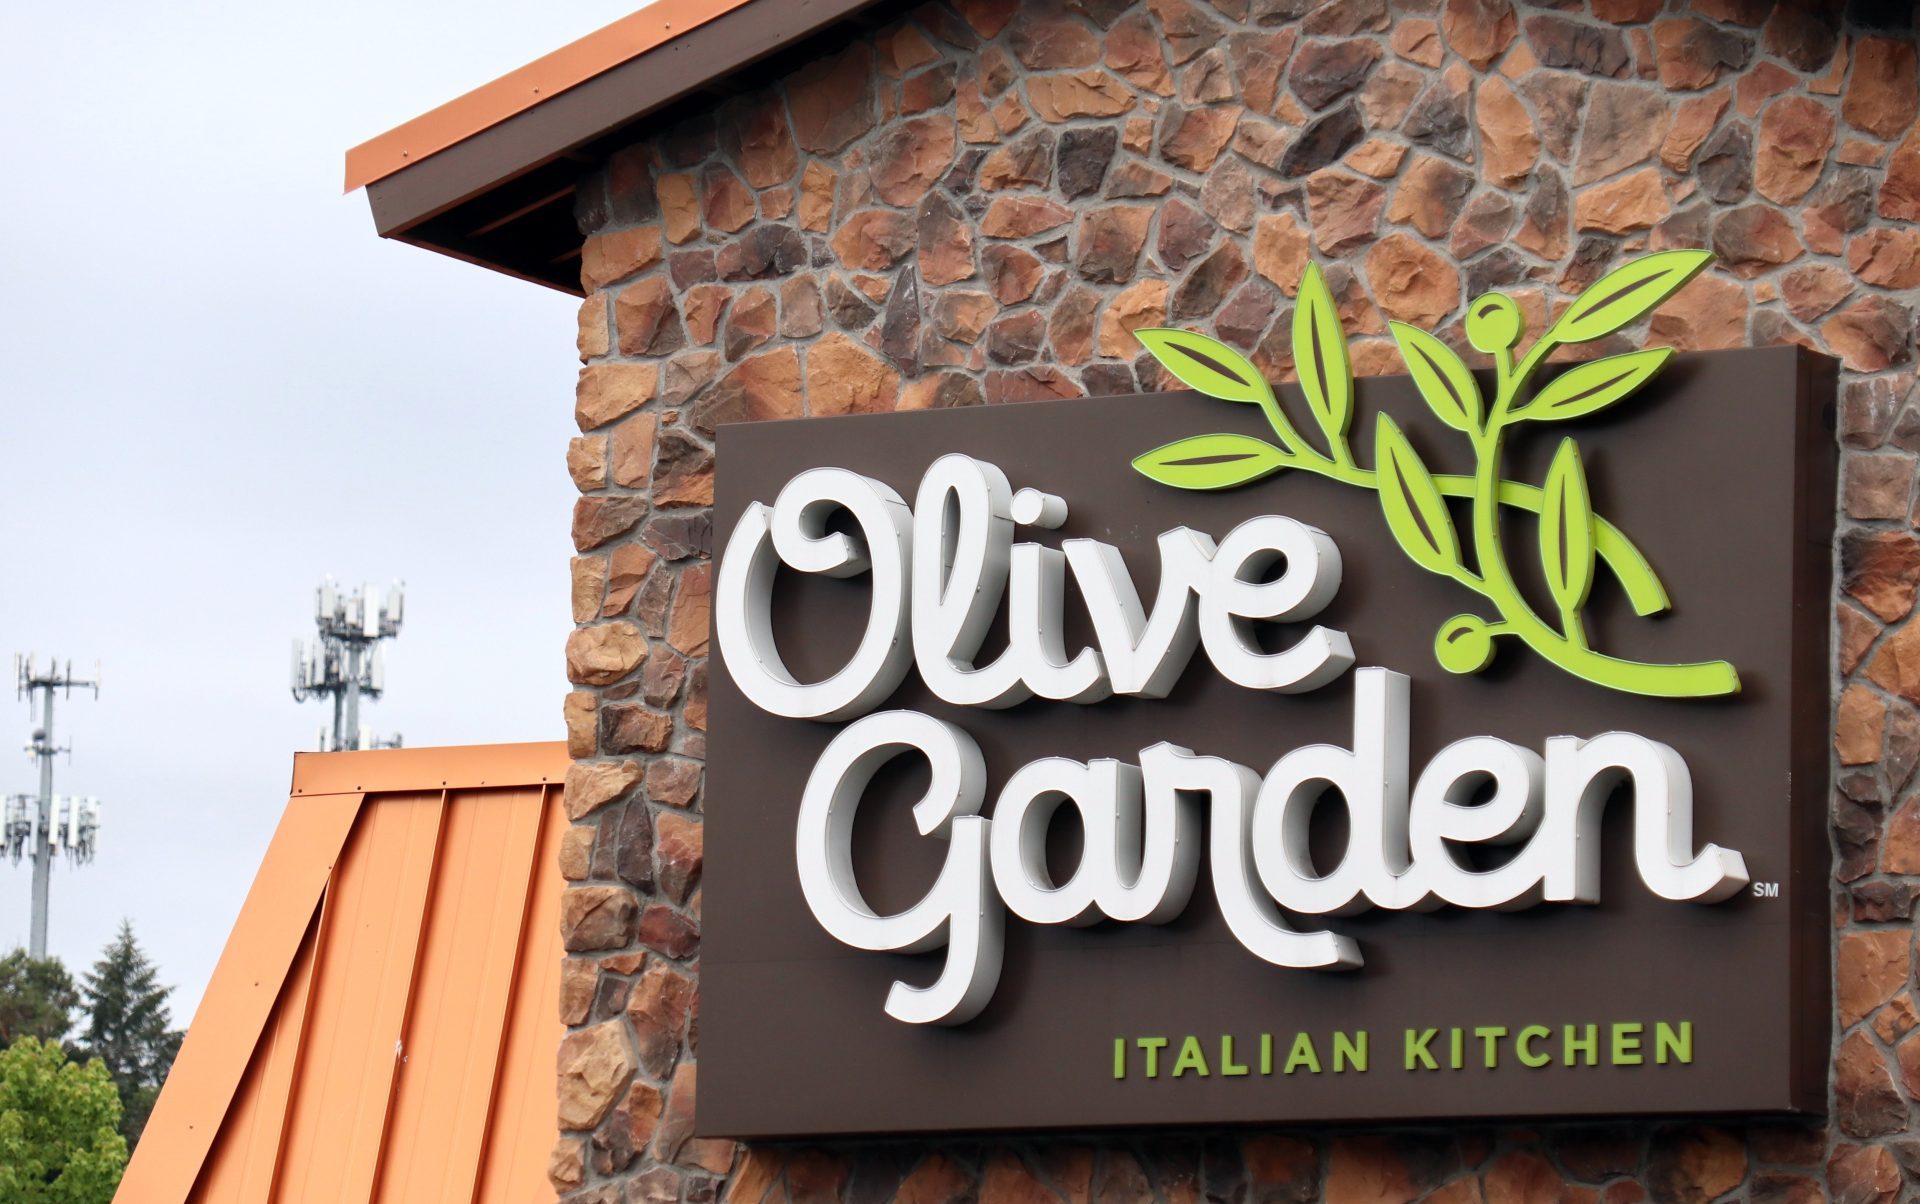 Doing Too Much! Olive Garden Manager Fired After Asking Workers To Prove Their Time-Off Requests